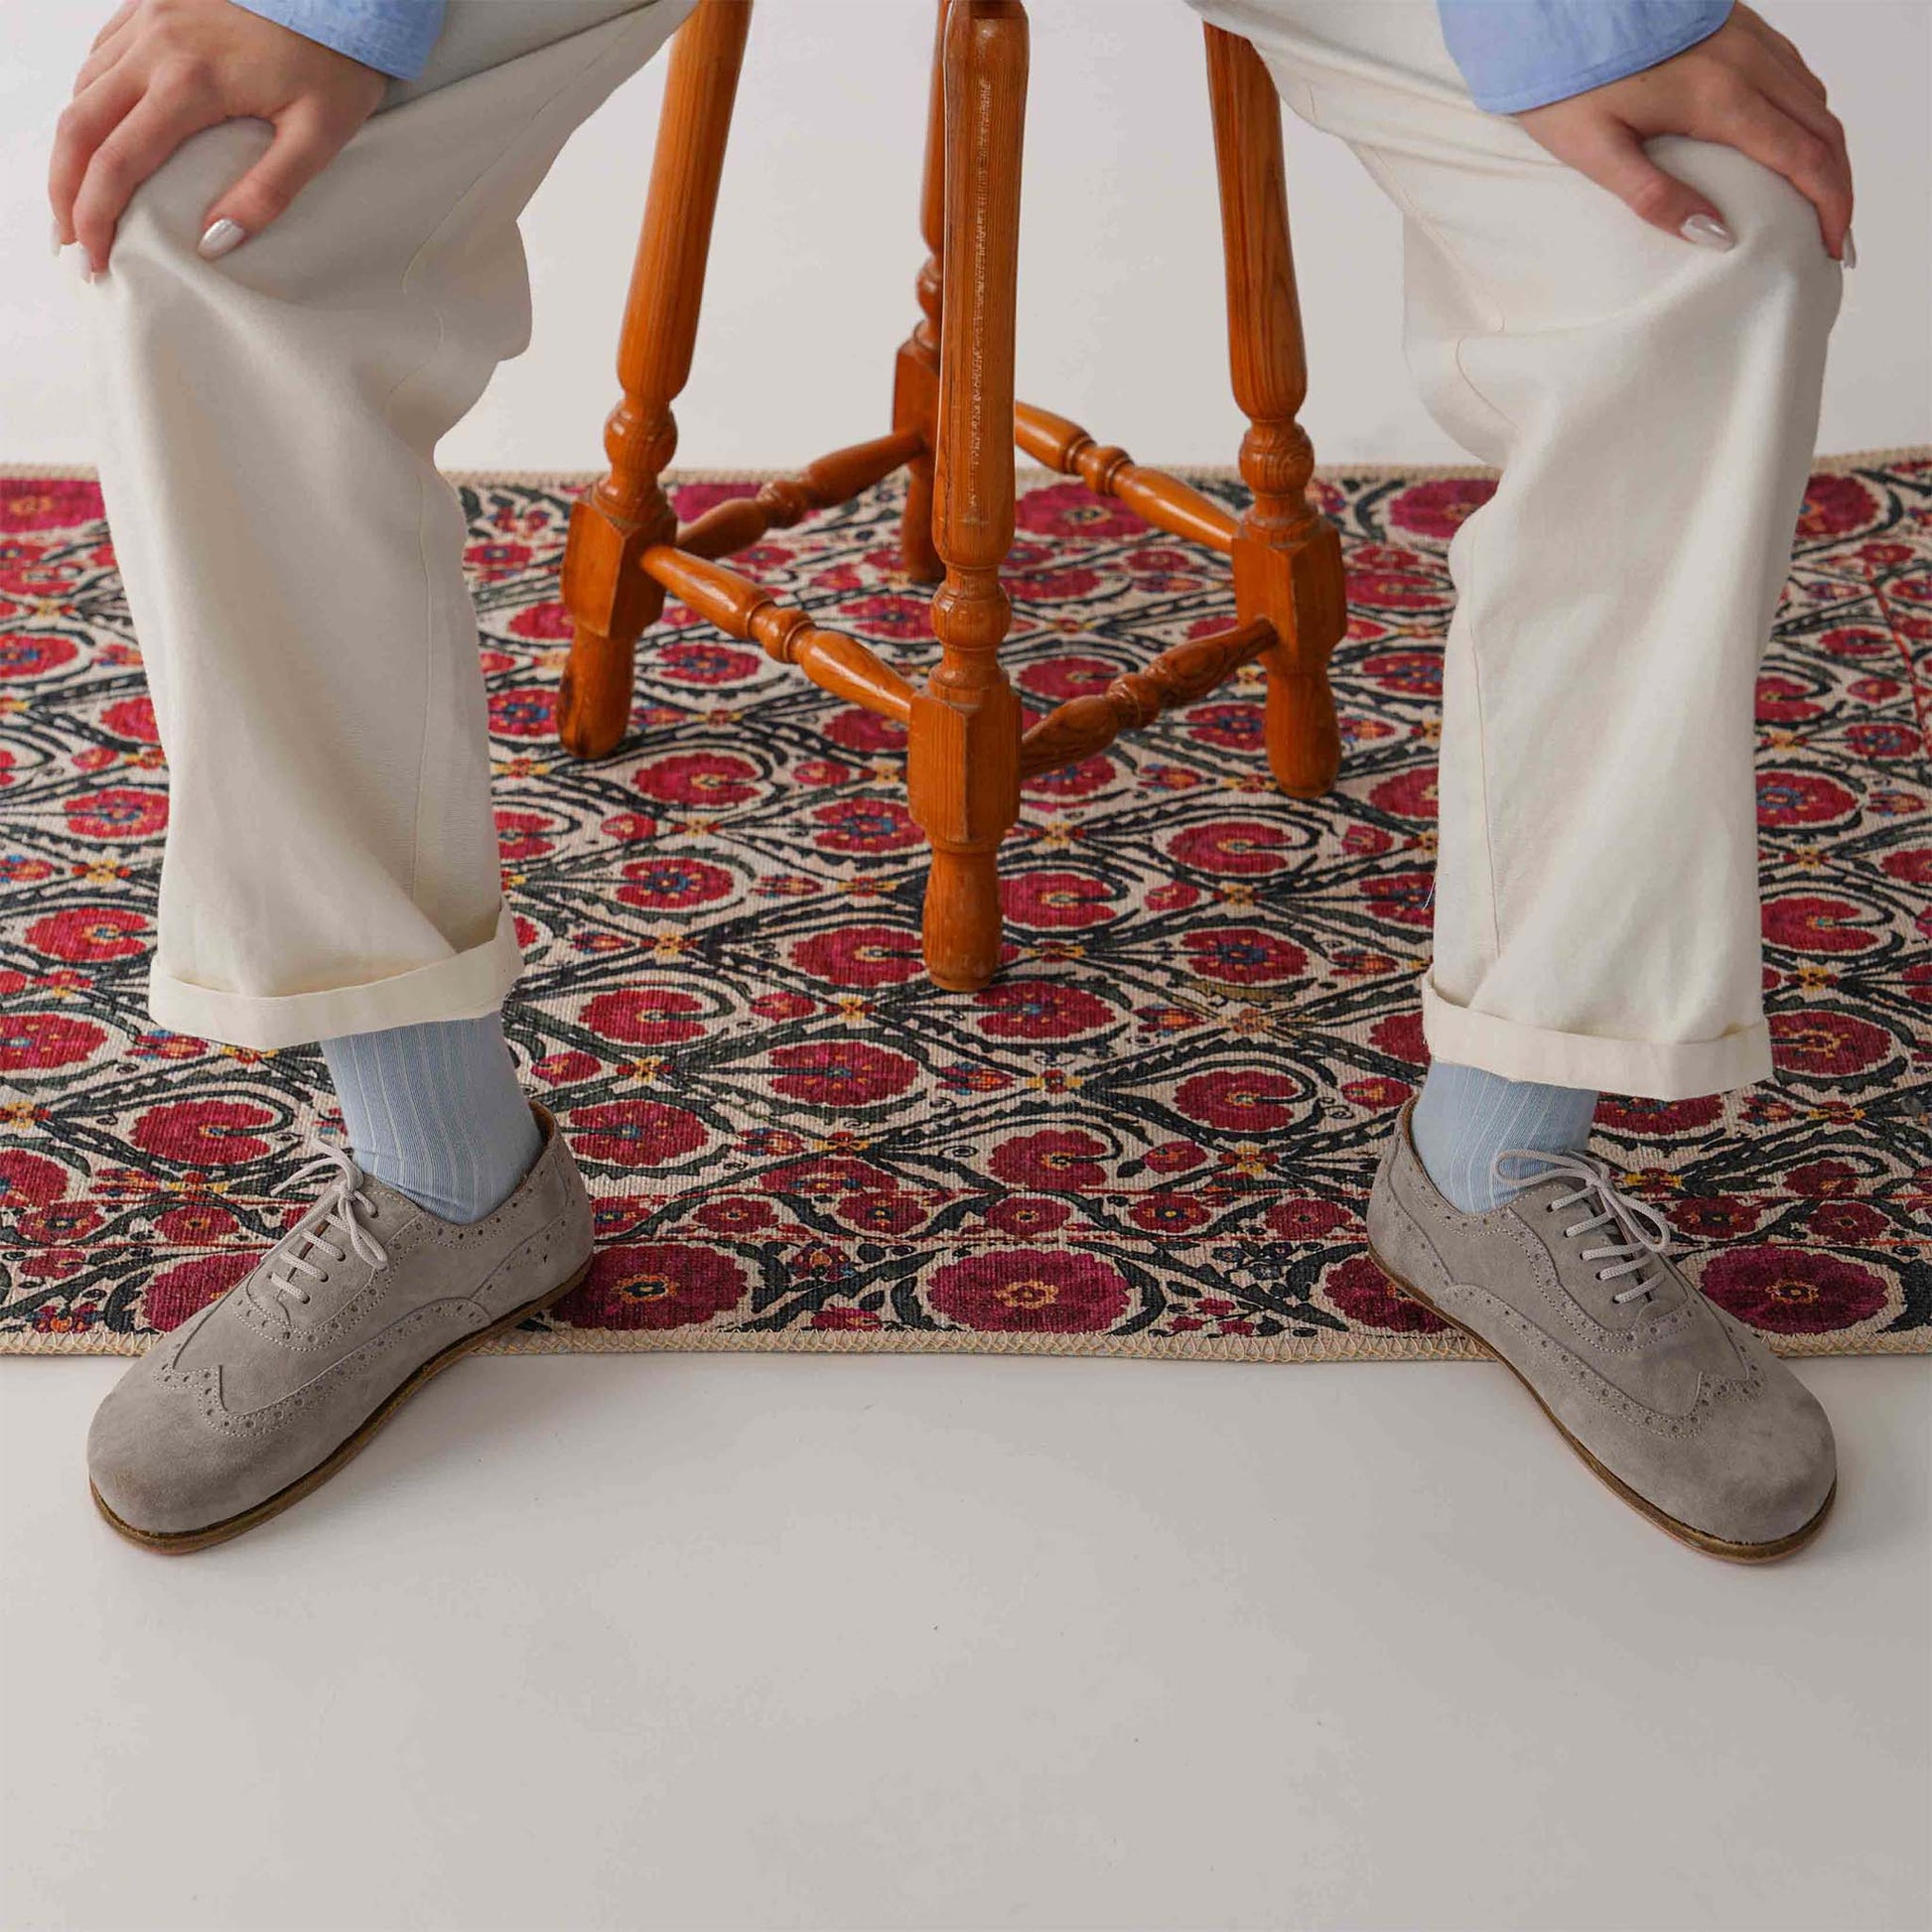 Model seated on a colorful rug, wearing gray Doris leather barefoot women Oxfords paired with white pants and blue socks.